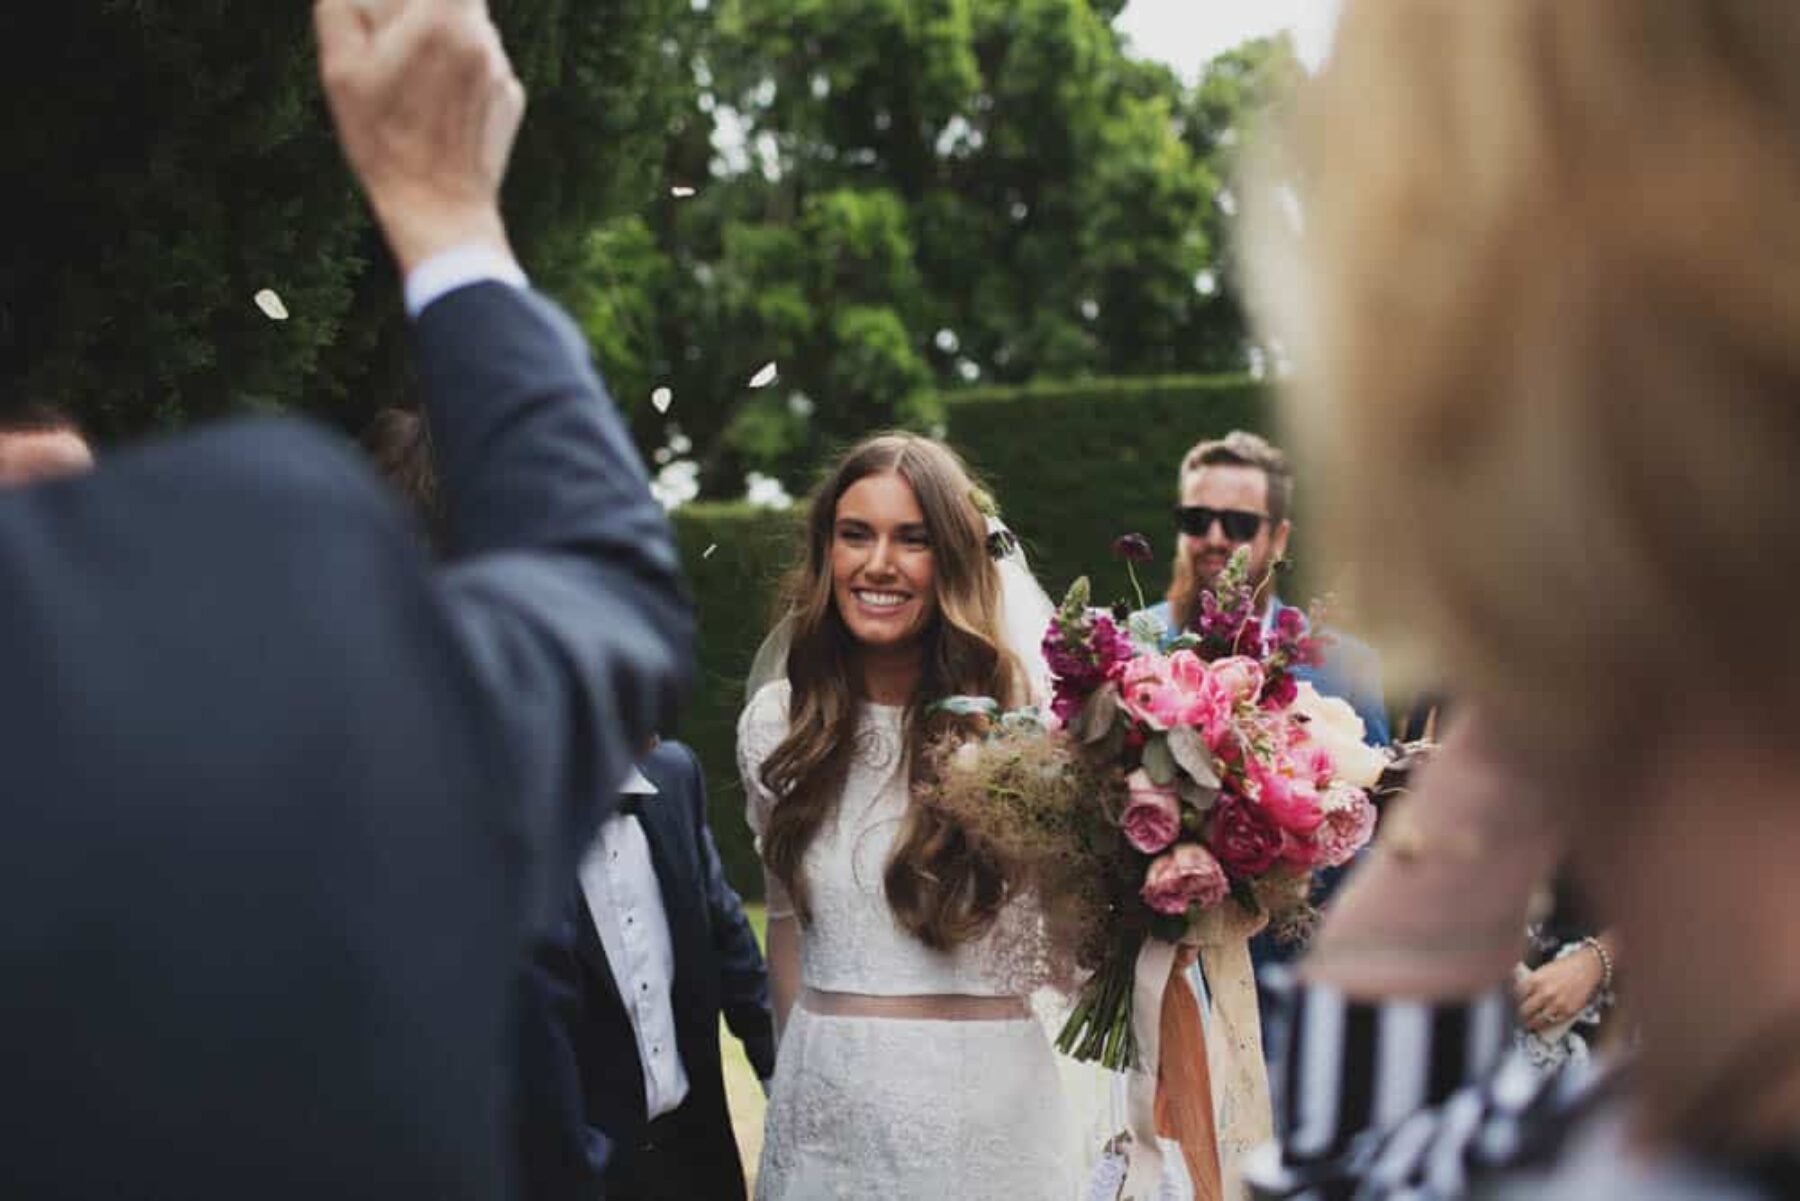 Garden wedding at Adelaide's Carrick Hill | Whitewall Photography